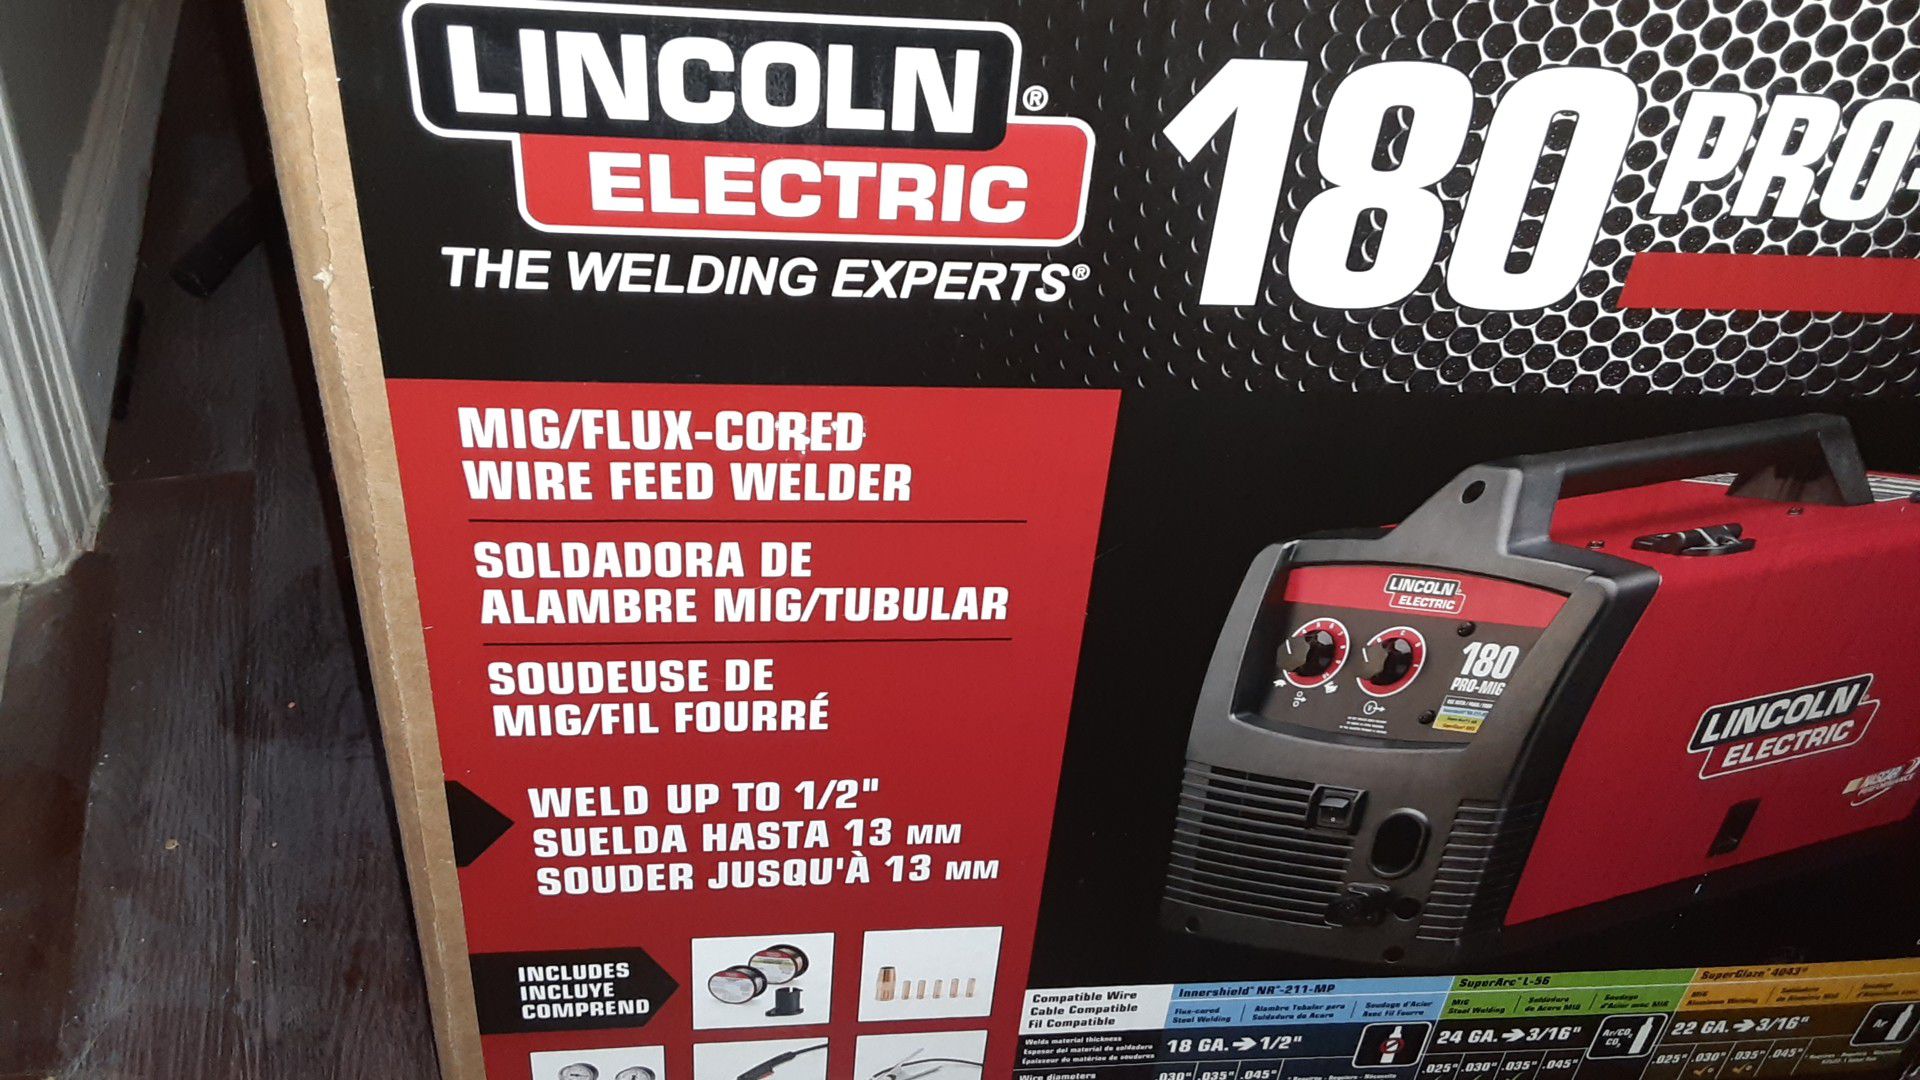 Lincoln electric welder 180 PRO-MIG